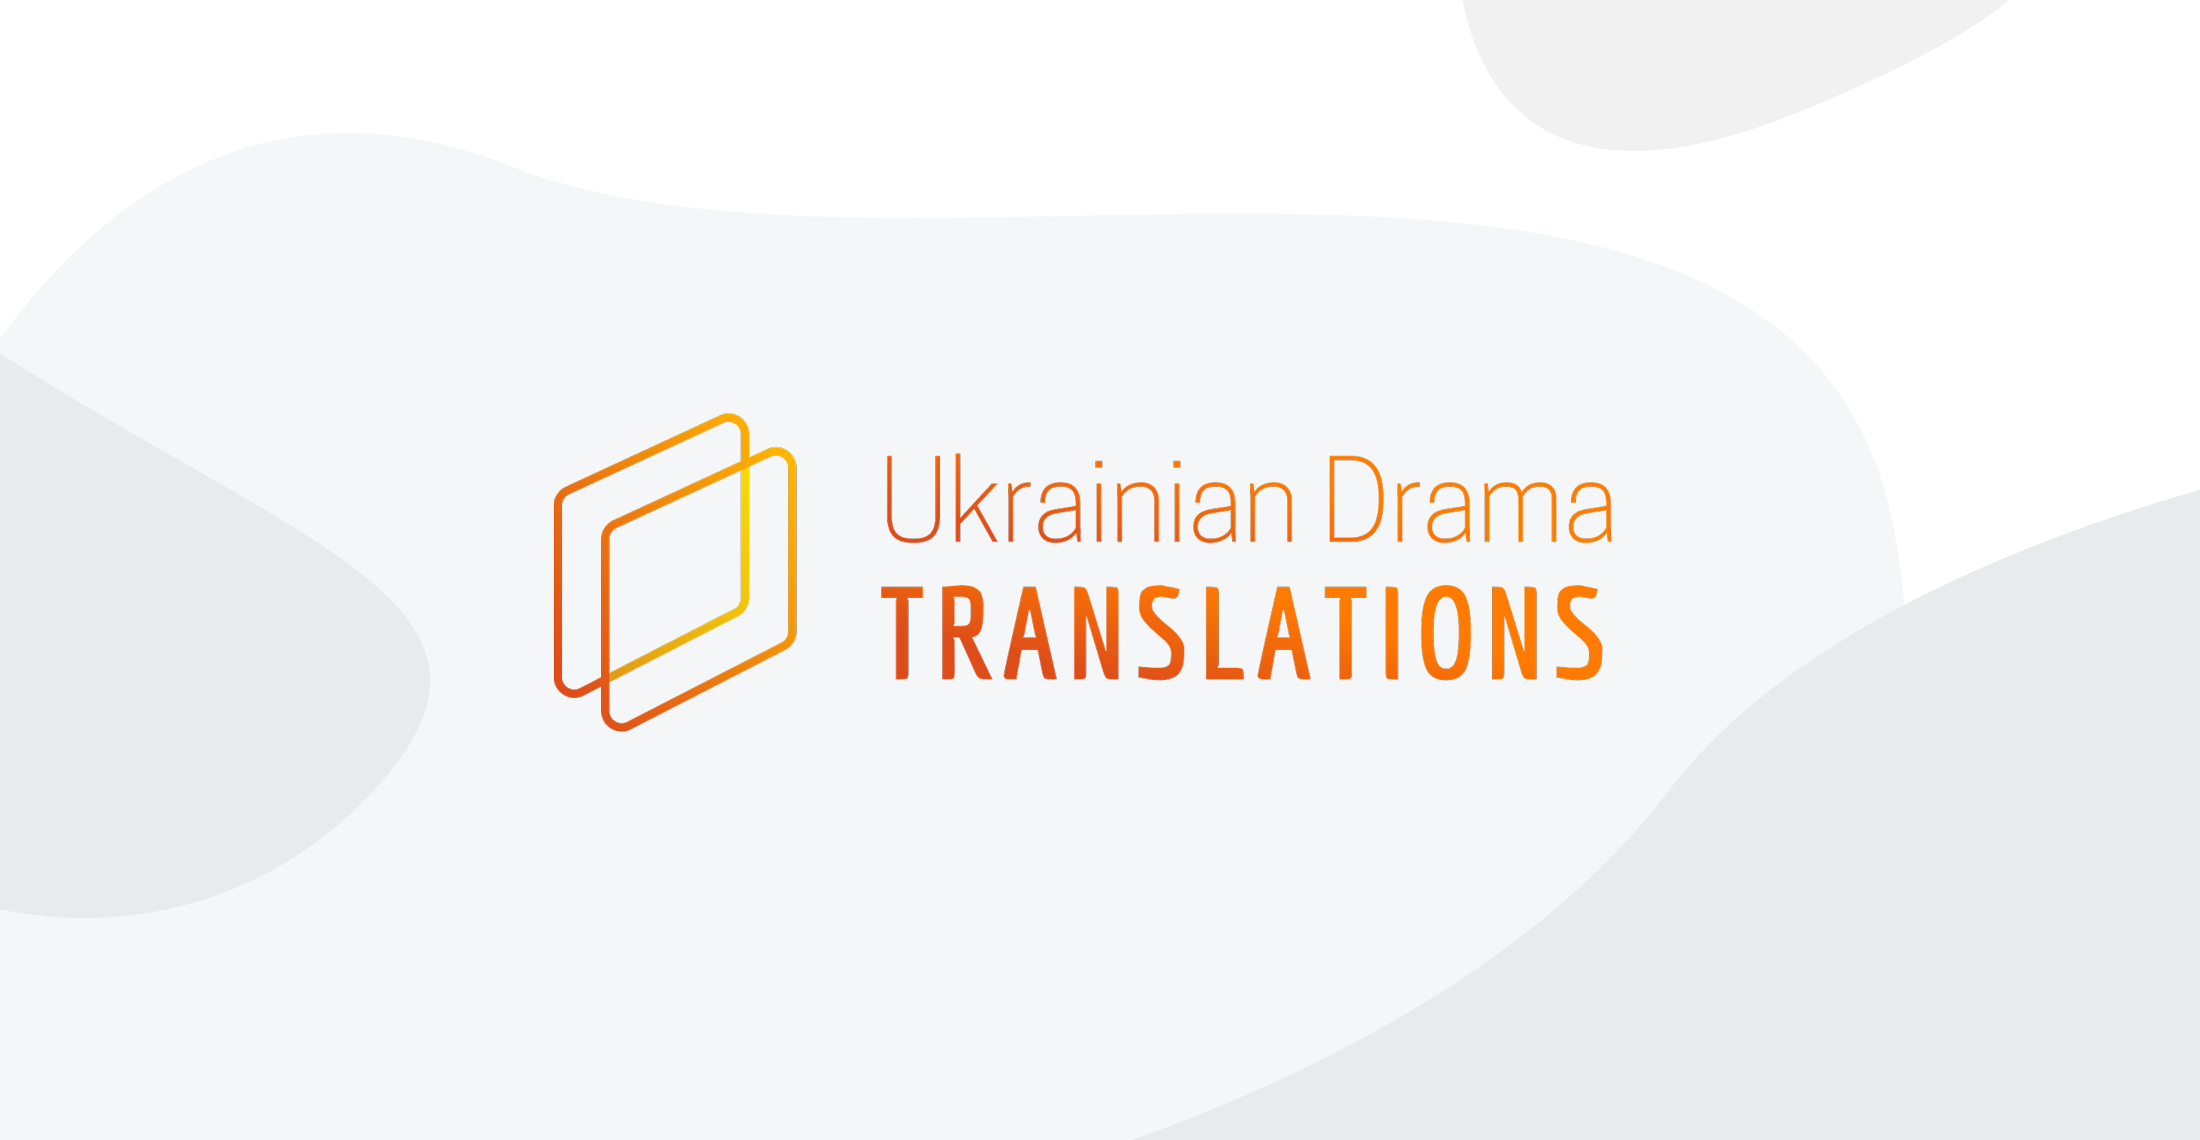 Digital library of translations of modern Ukrainian drama has been launched. How does it work?